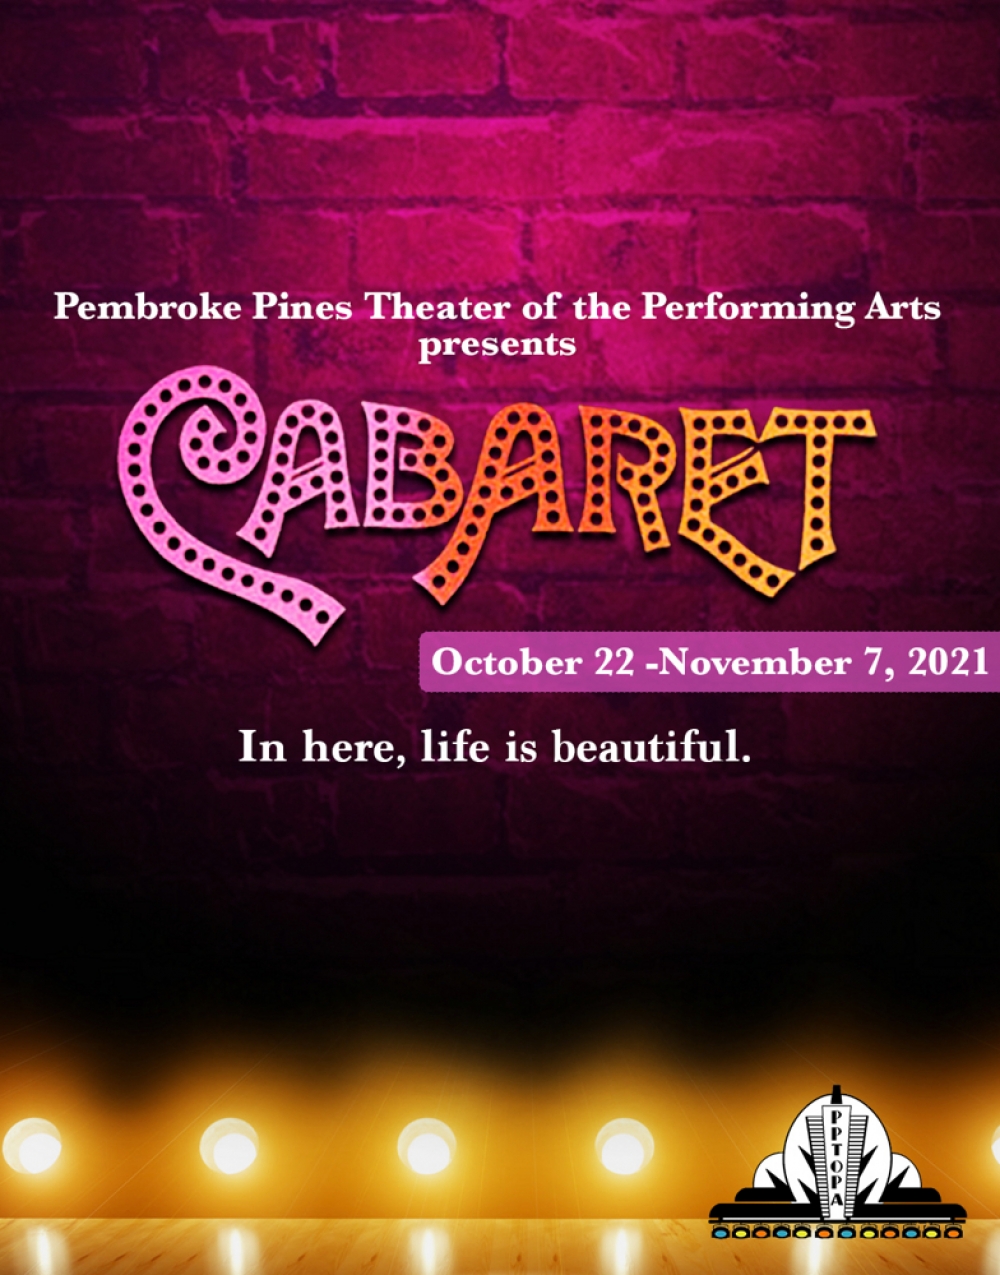 Cabaret at Pembroke Pines Theatre of the Performing Arts